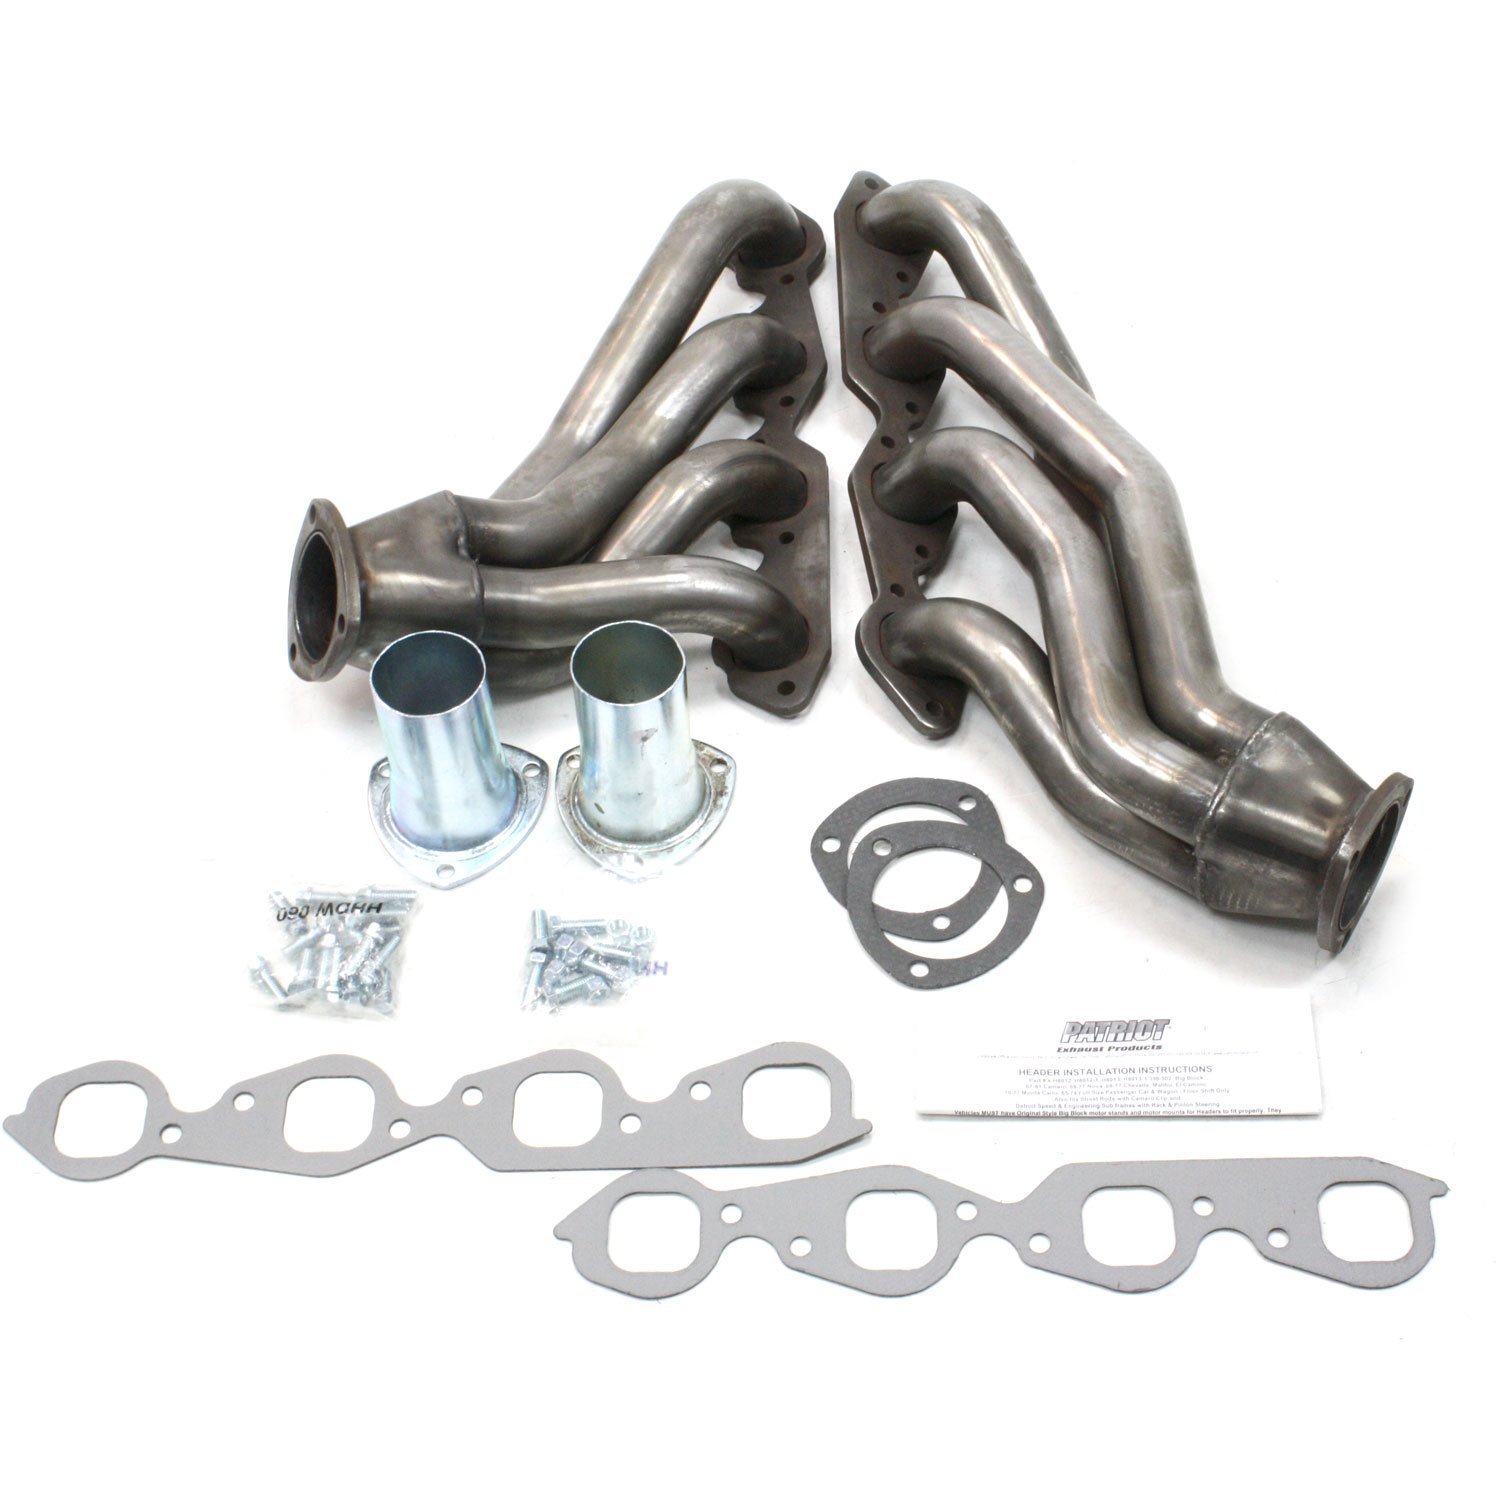 GM Specific Fit Headers 1965-1974 Full Size Passenger Car